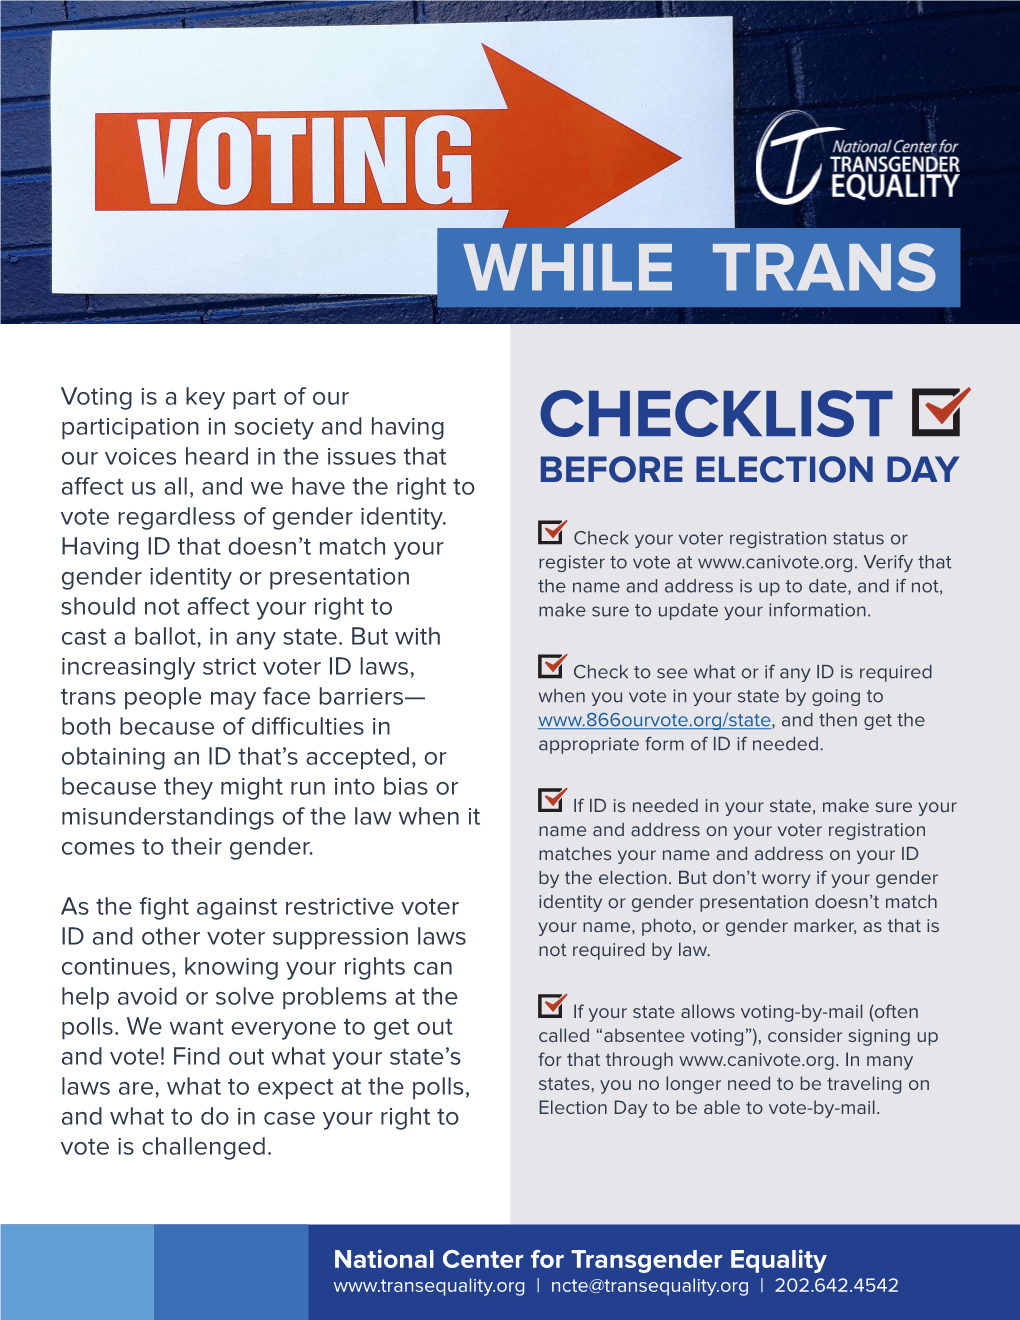 Voting While Trans